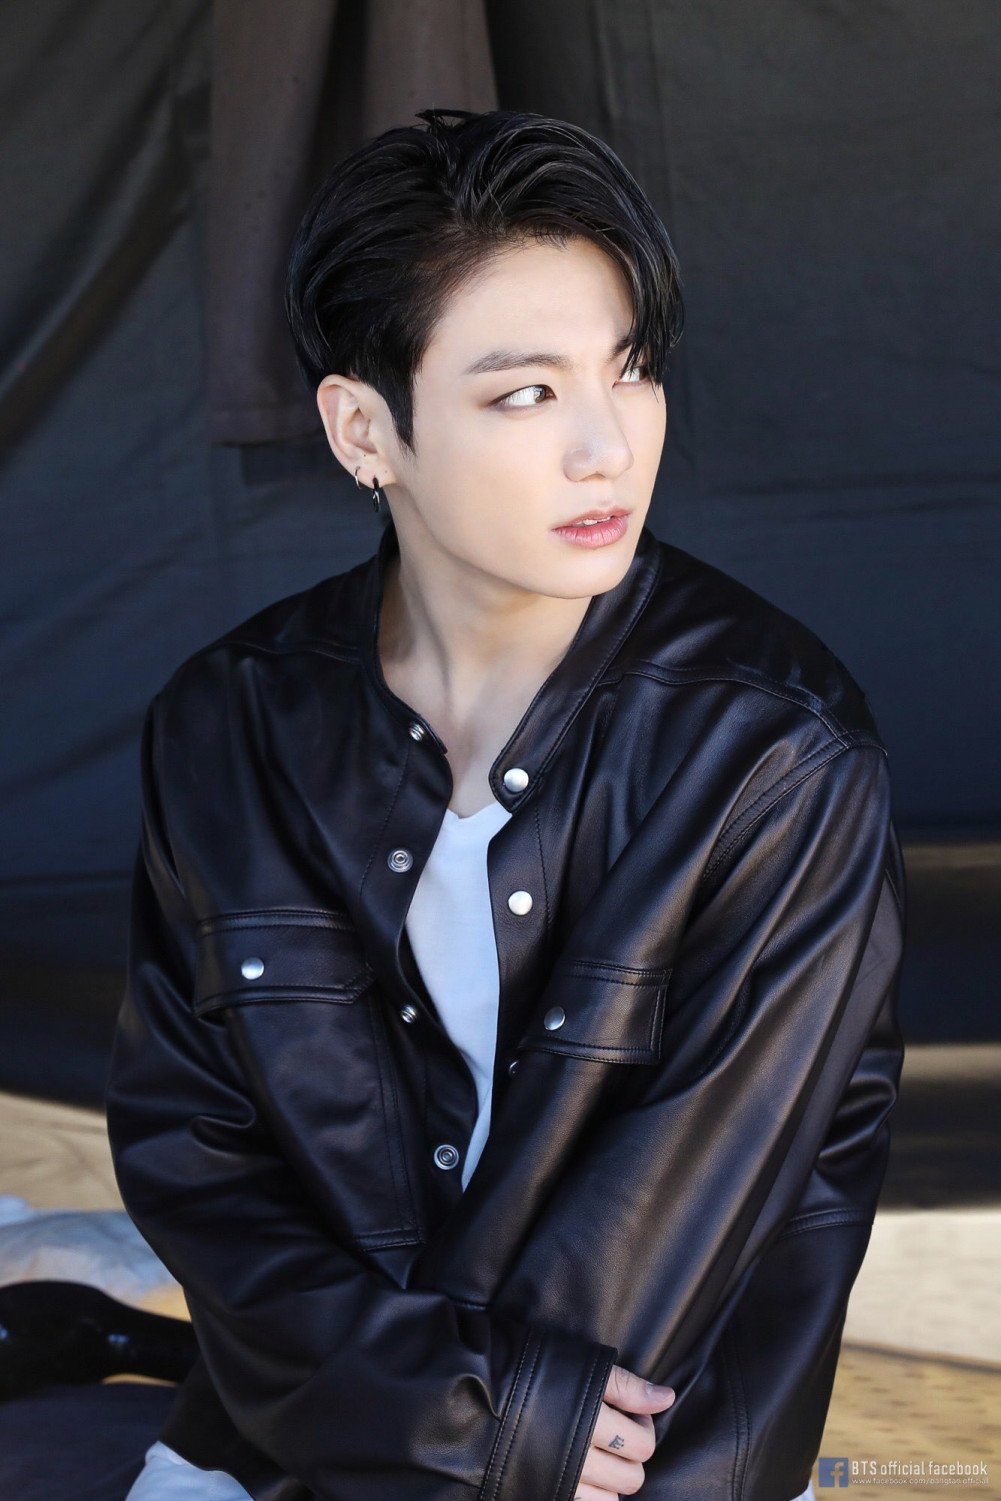 Have You Seen These Rare And Unseen Photoshoots Of BTS Jungkook Yet? 2